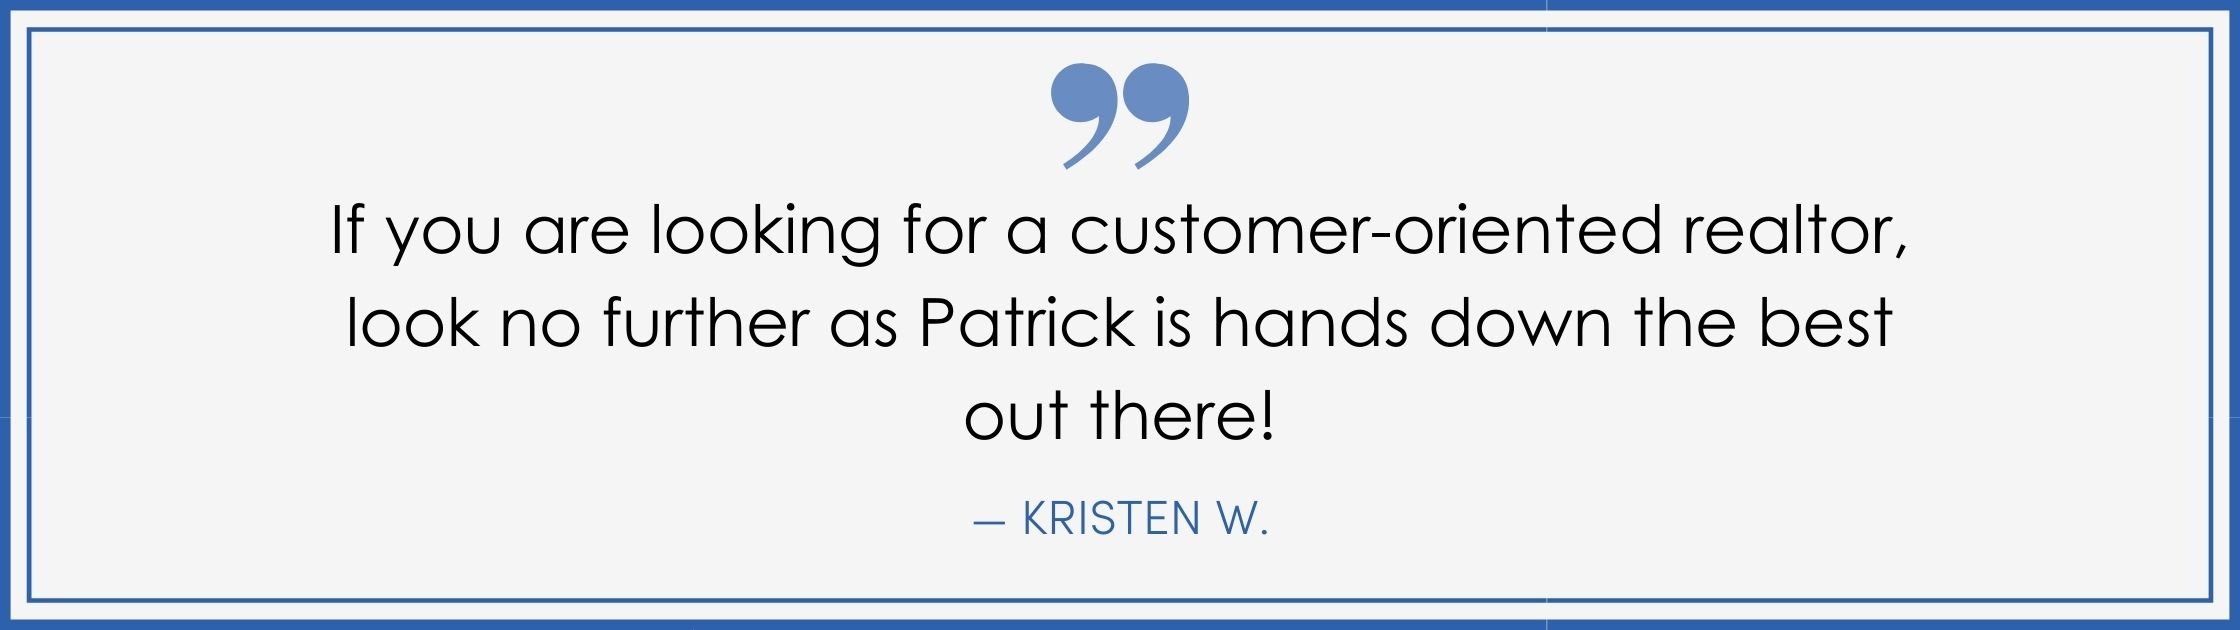 “If you are looking for a customer-oriented realtor, look no further as Patrick is hands-down the best out there! –Kristen W. (Copy) (Copy)